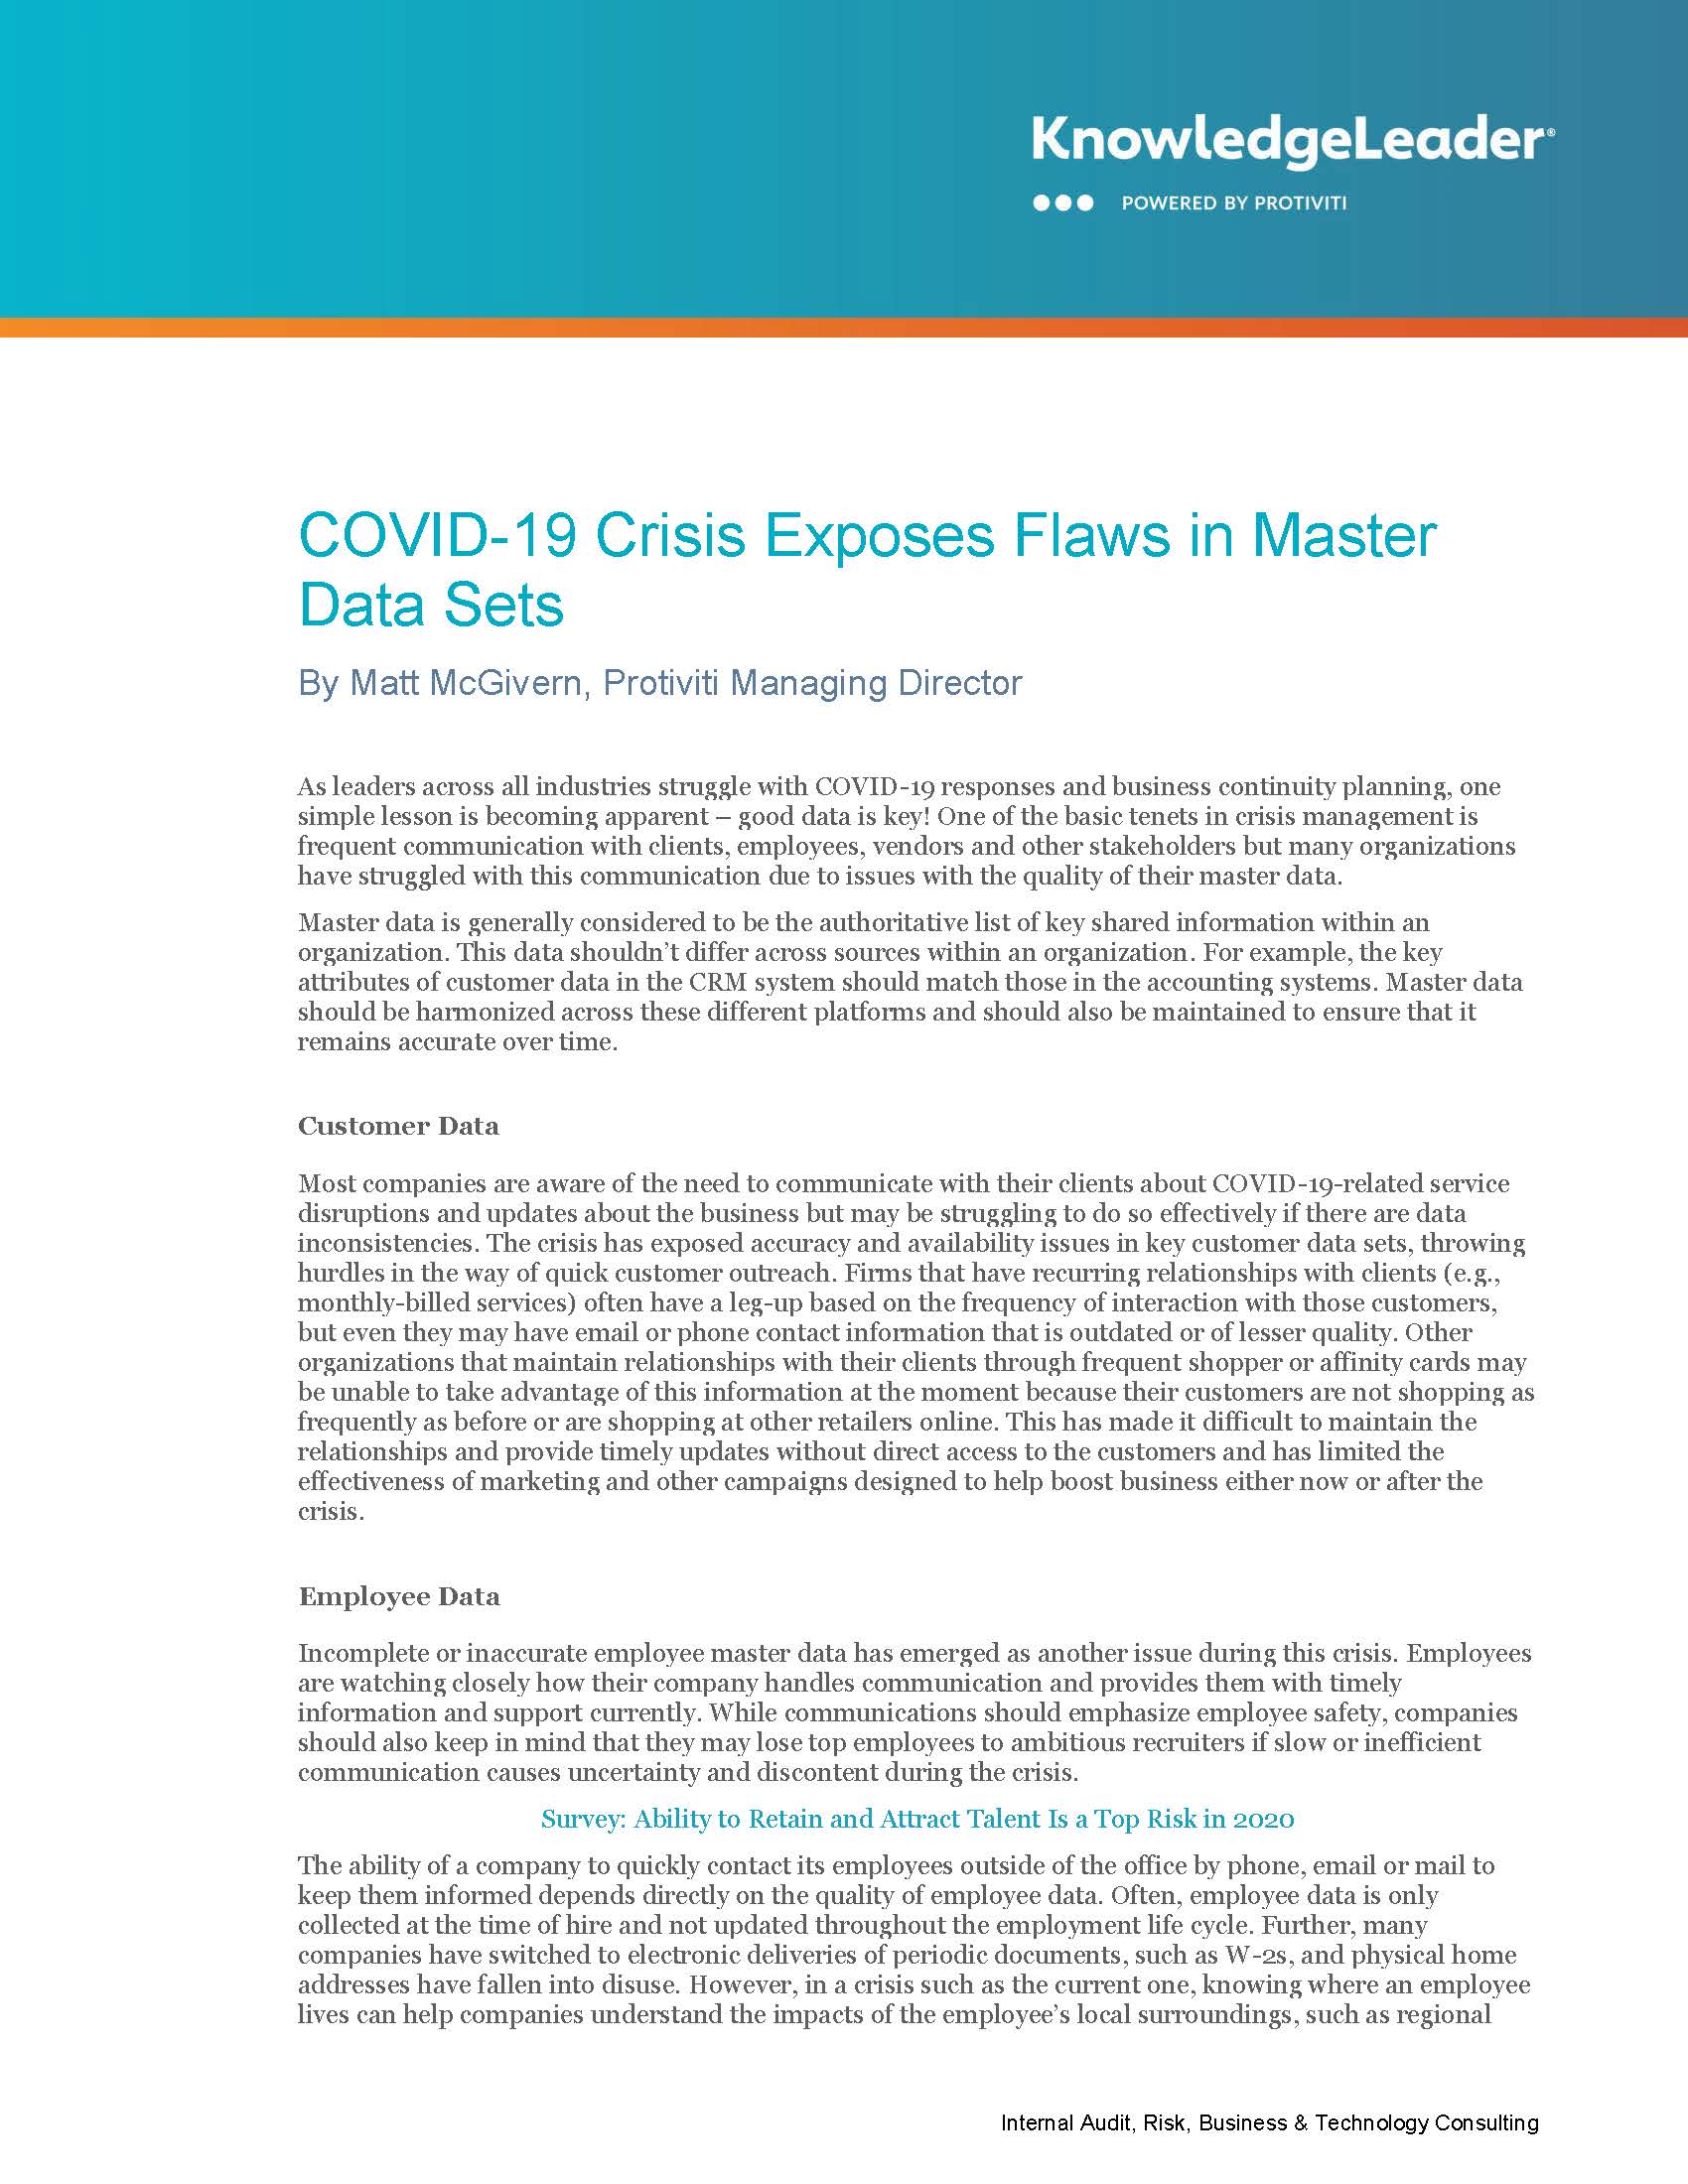 COVID-19 Crisis Exposes Flaws in Master Data Sets